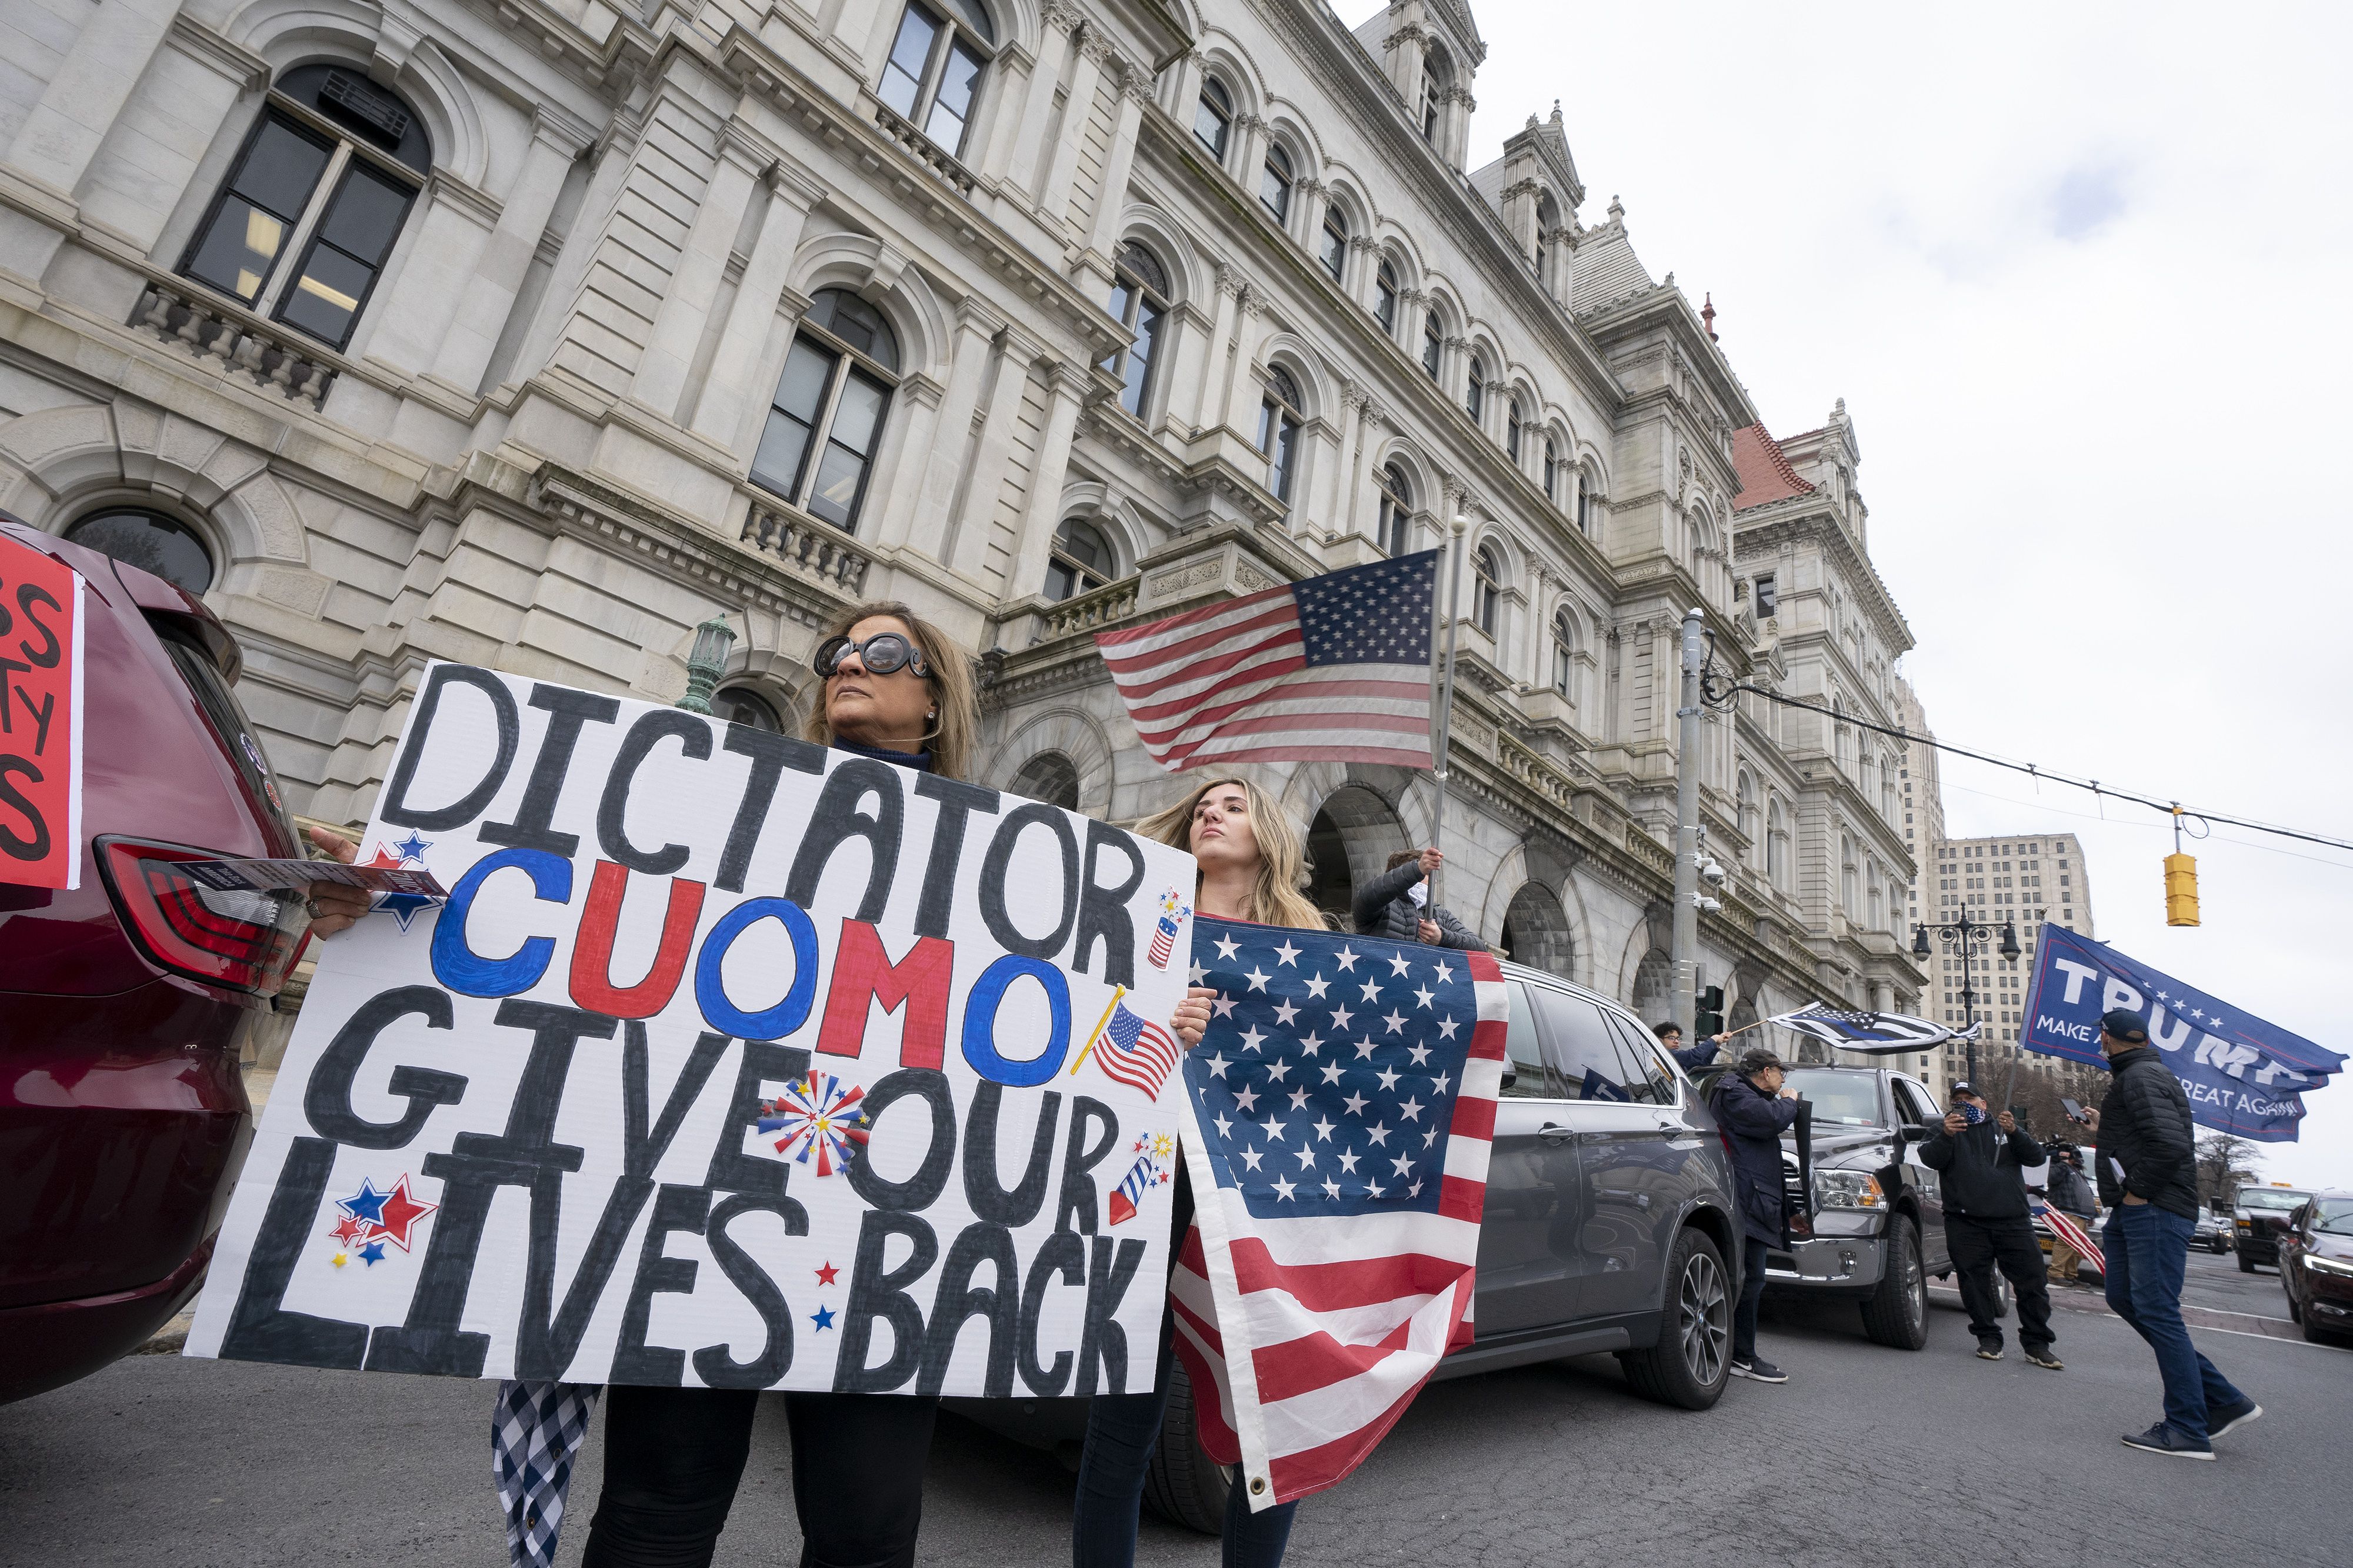 Demonstrators hold signs outside of the New York State Capitol Building on April 22, 2020 in Albany, New York